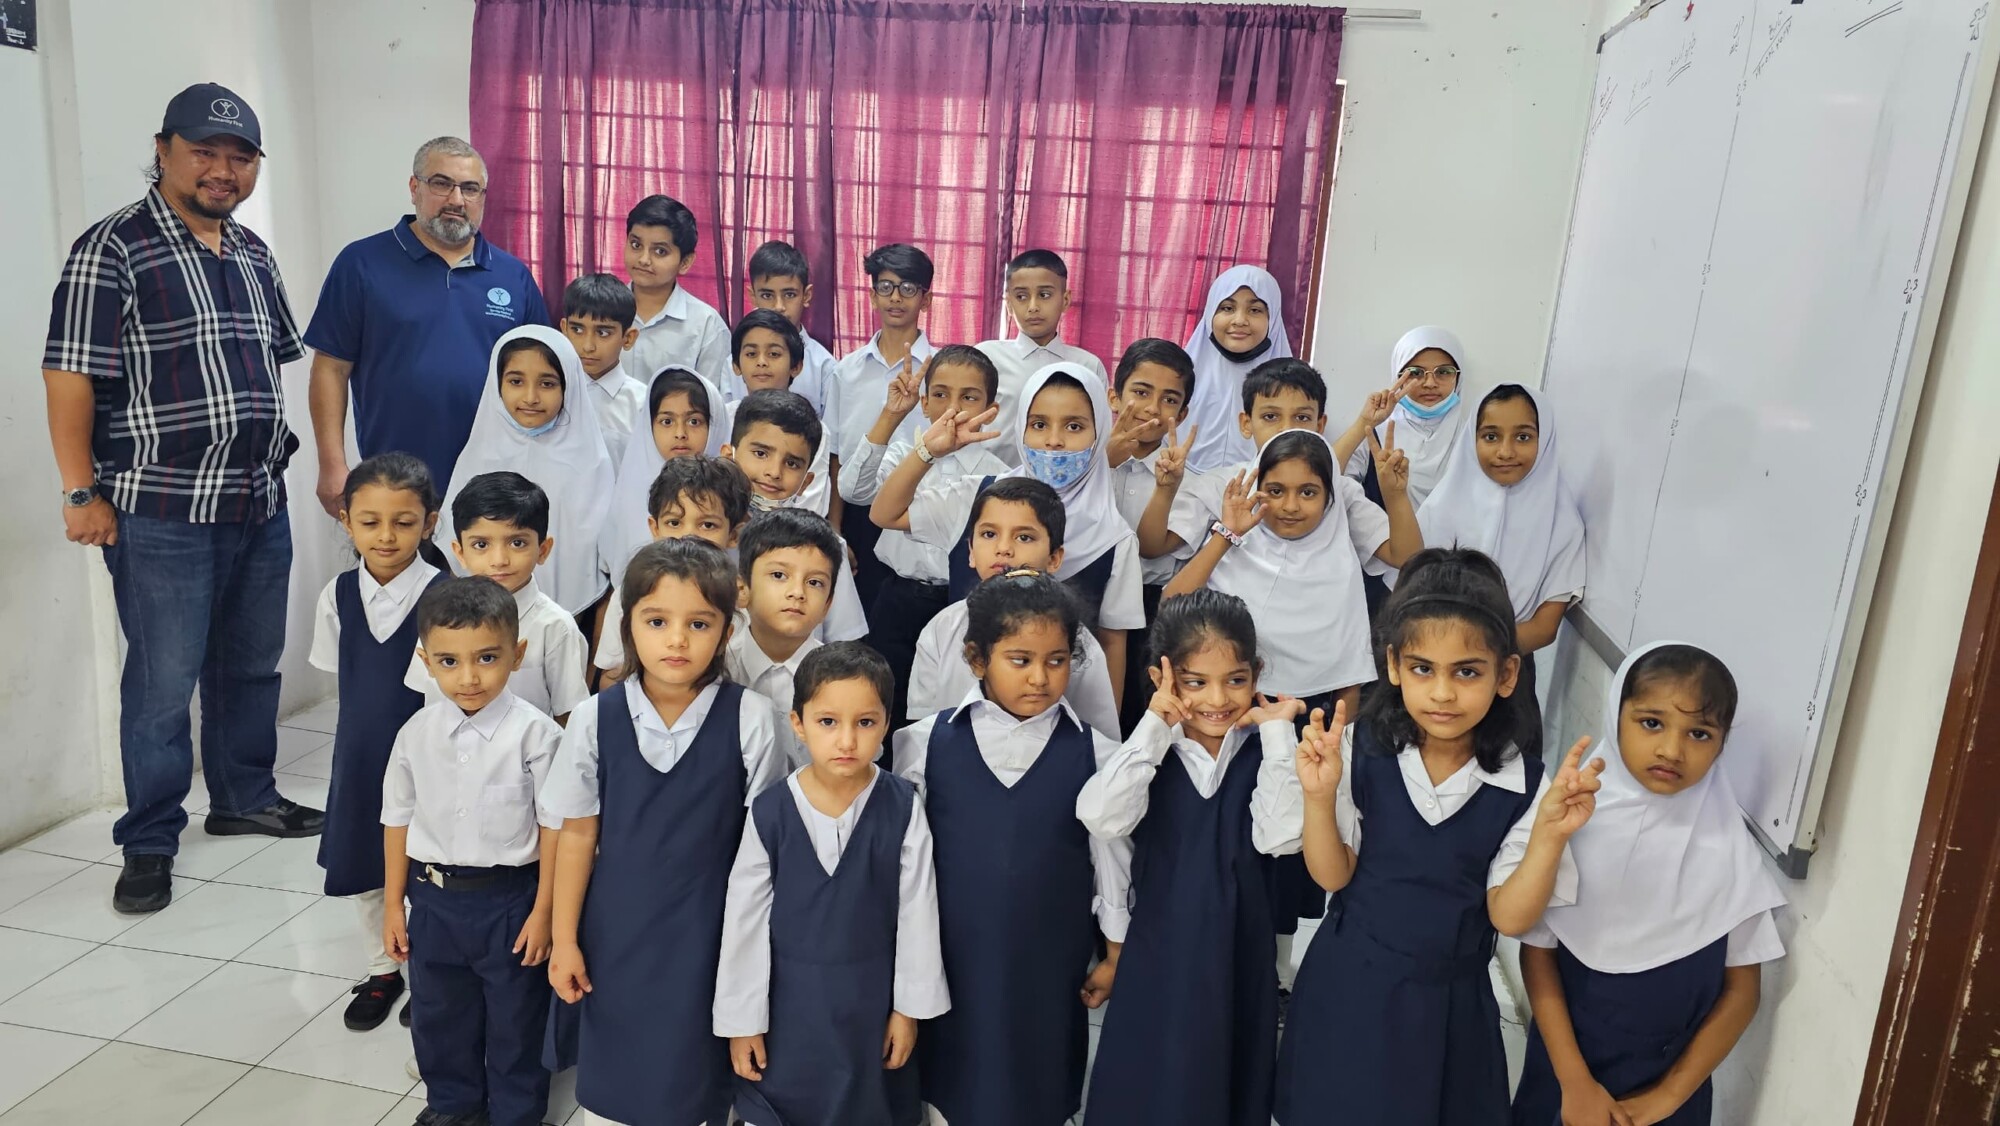 About two dozen students of multiple elementary school ages wear white and blue school uniforms and pose in a group with a member of school staff and our visiting VP of Human Development Programs.